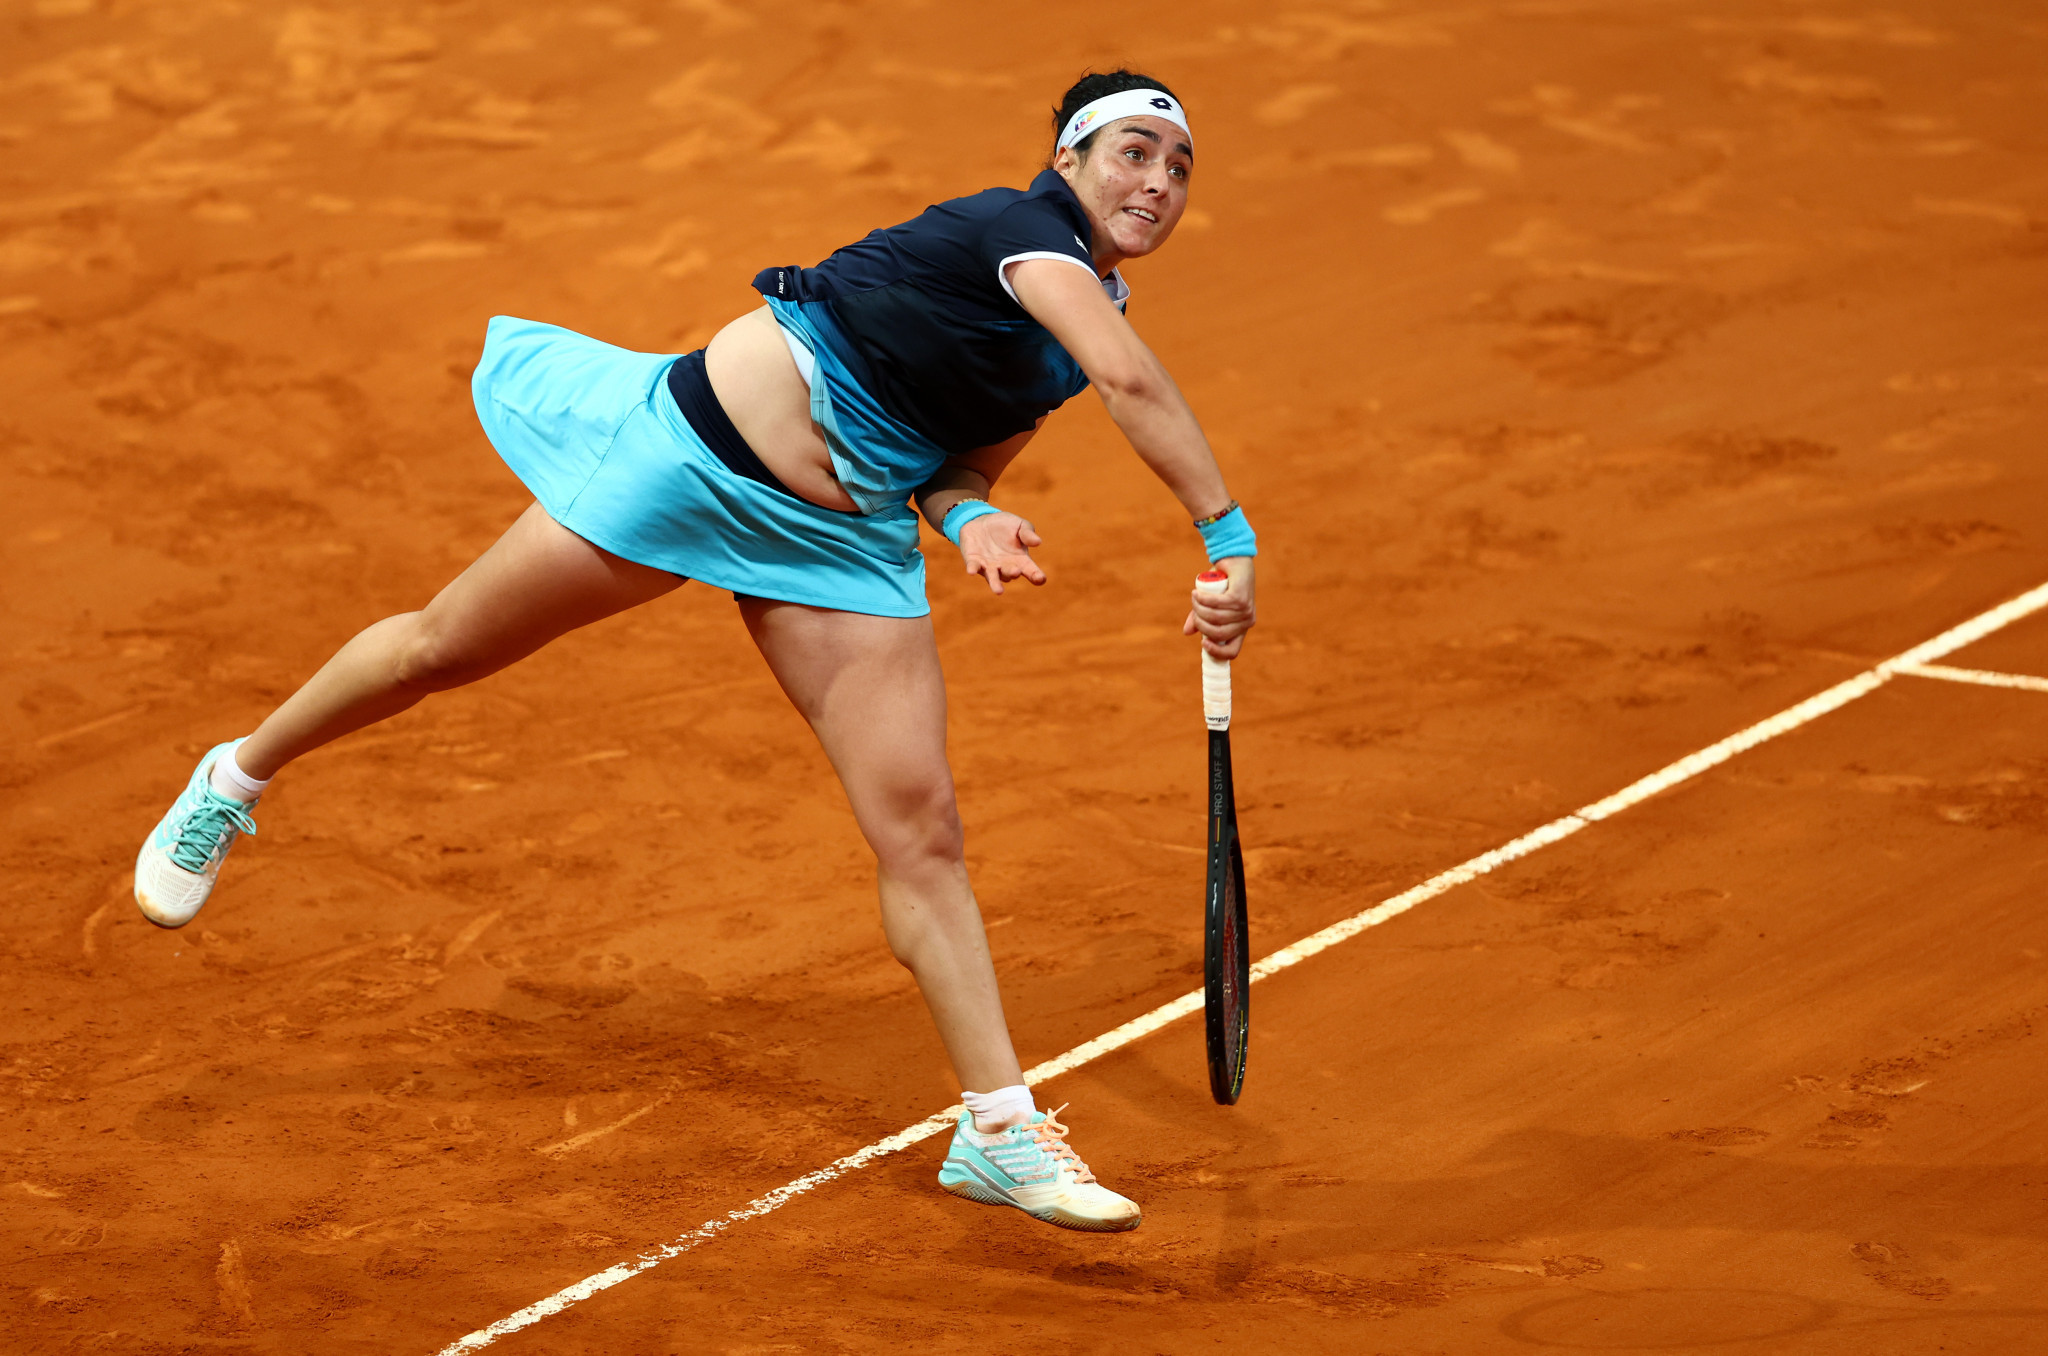 Tunisia's Ons Jabeur defeated Belinda Bencic in three sets at the WTA Madrid Open ©Getty Images